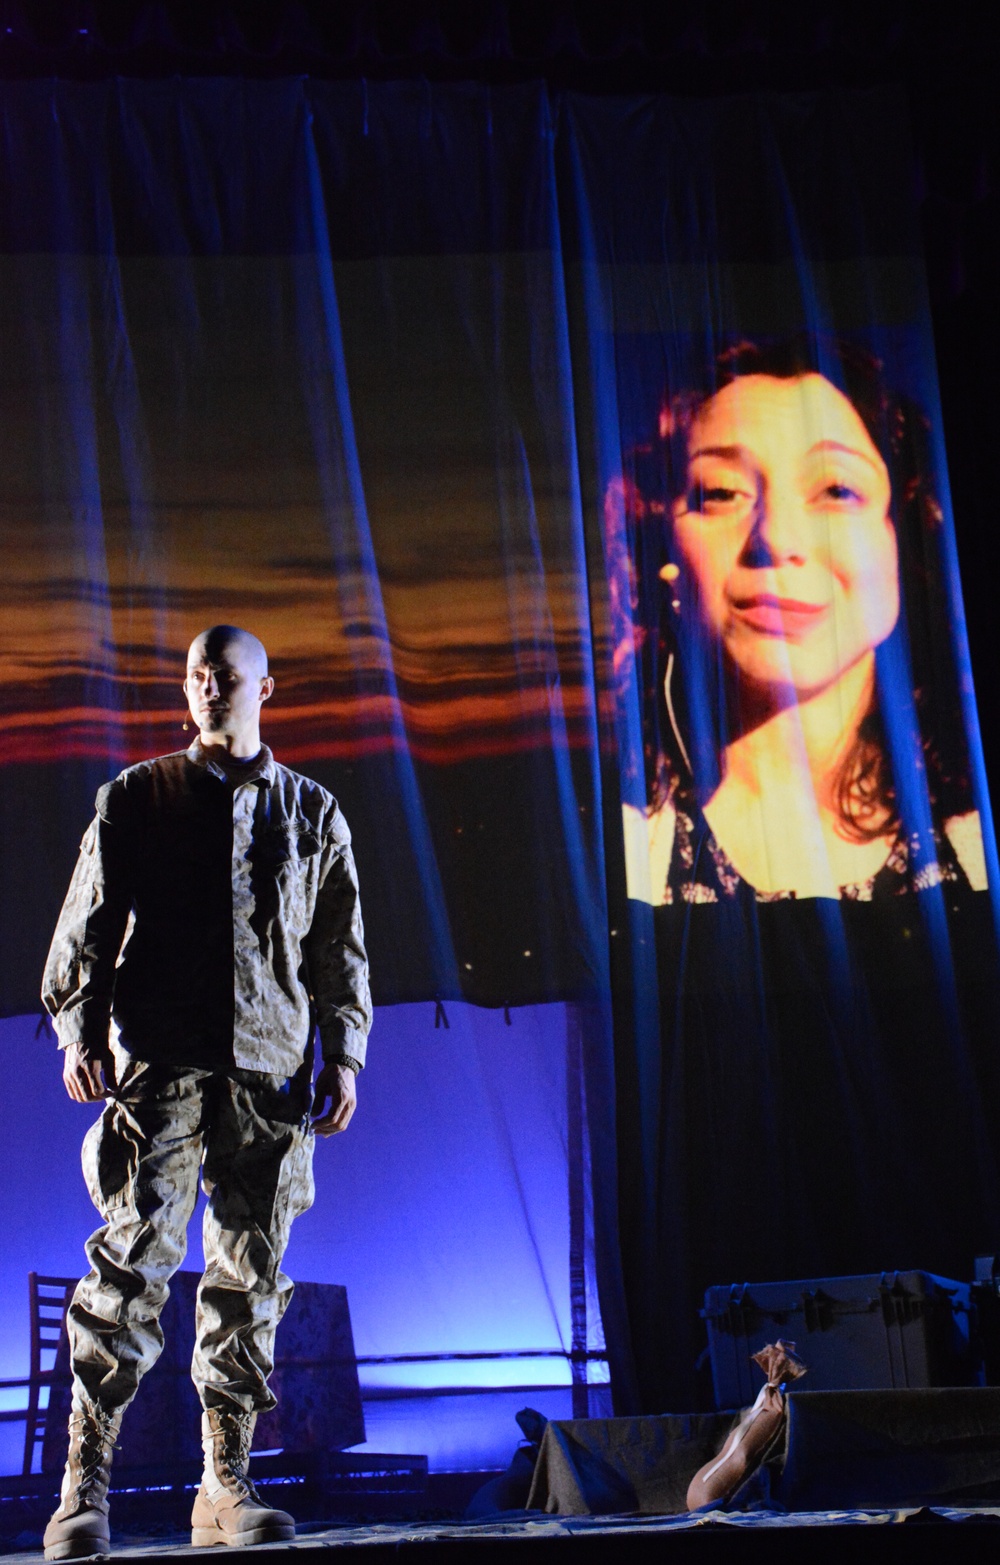 BASETRACK Live: Production tells story of war and its aftermath